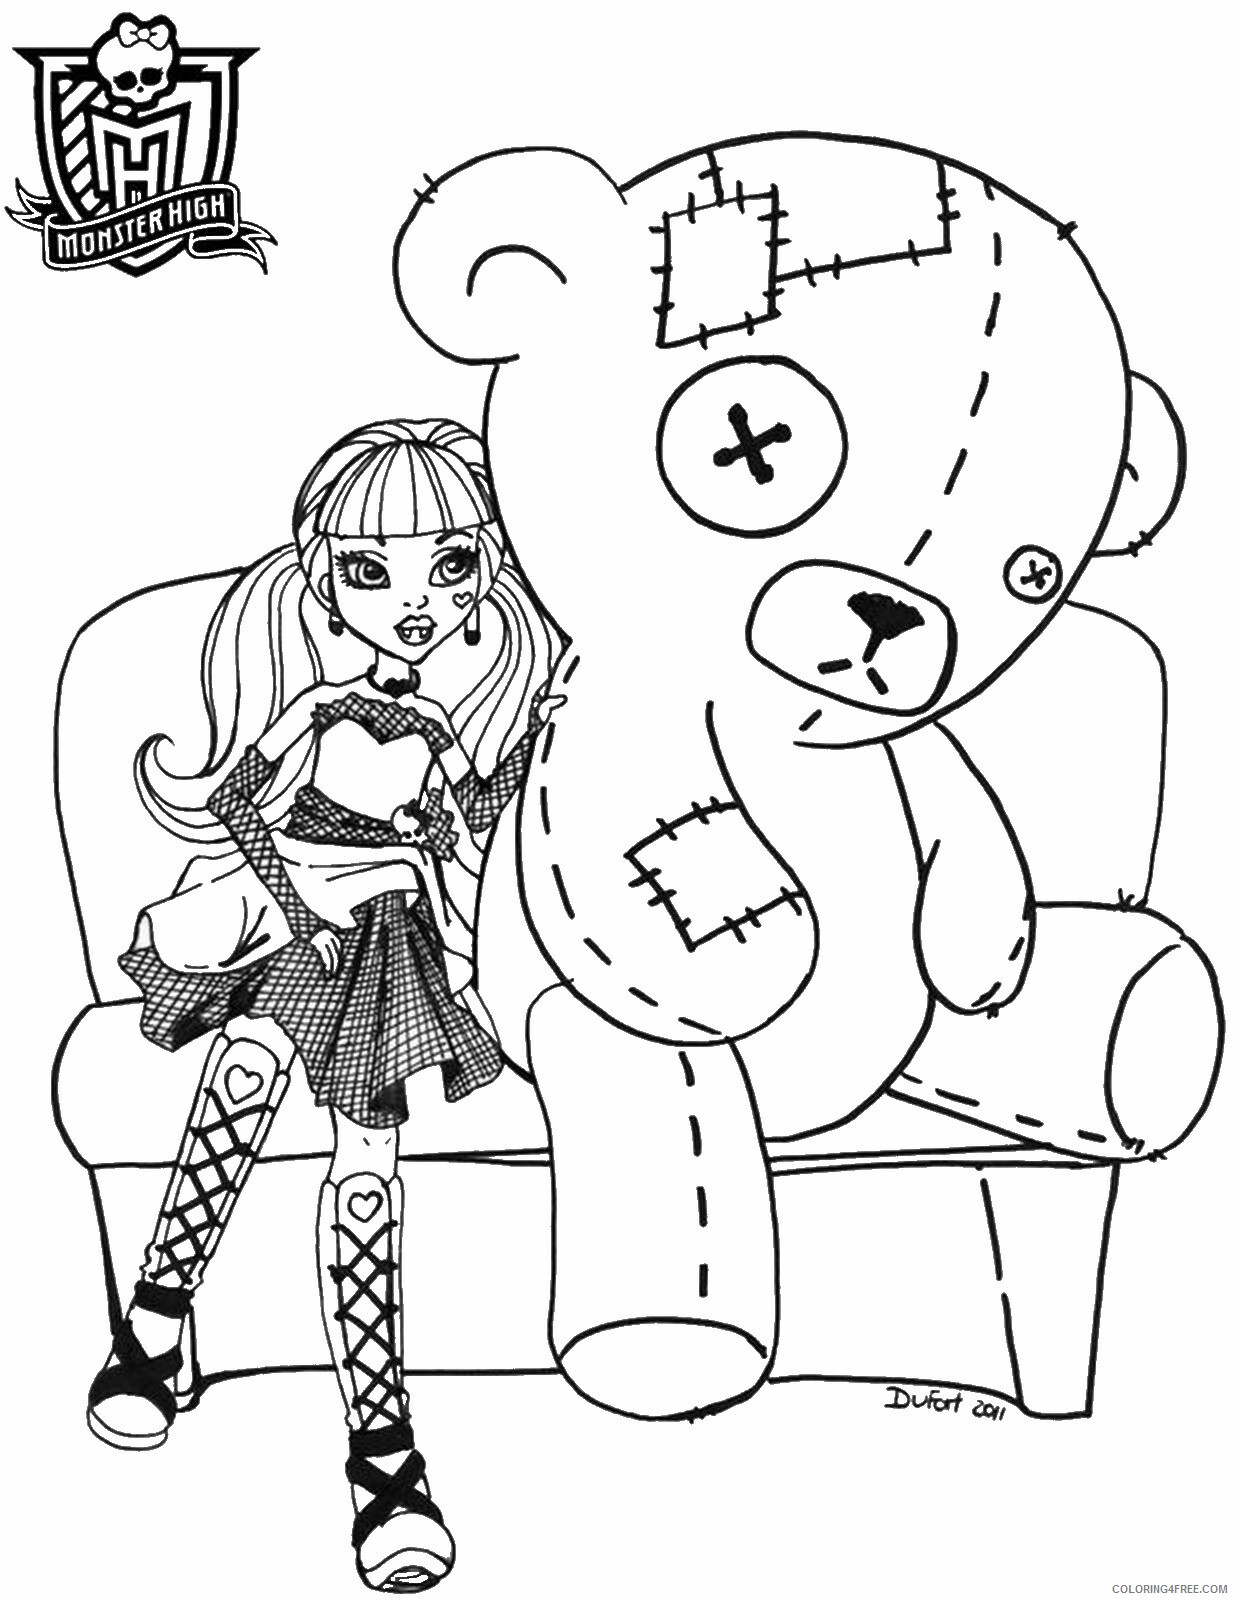 Monster High Coloring Pages monster_high_cl_41 Printable 2021 4182 Coloring4free